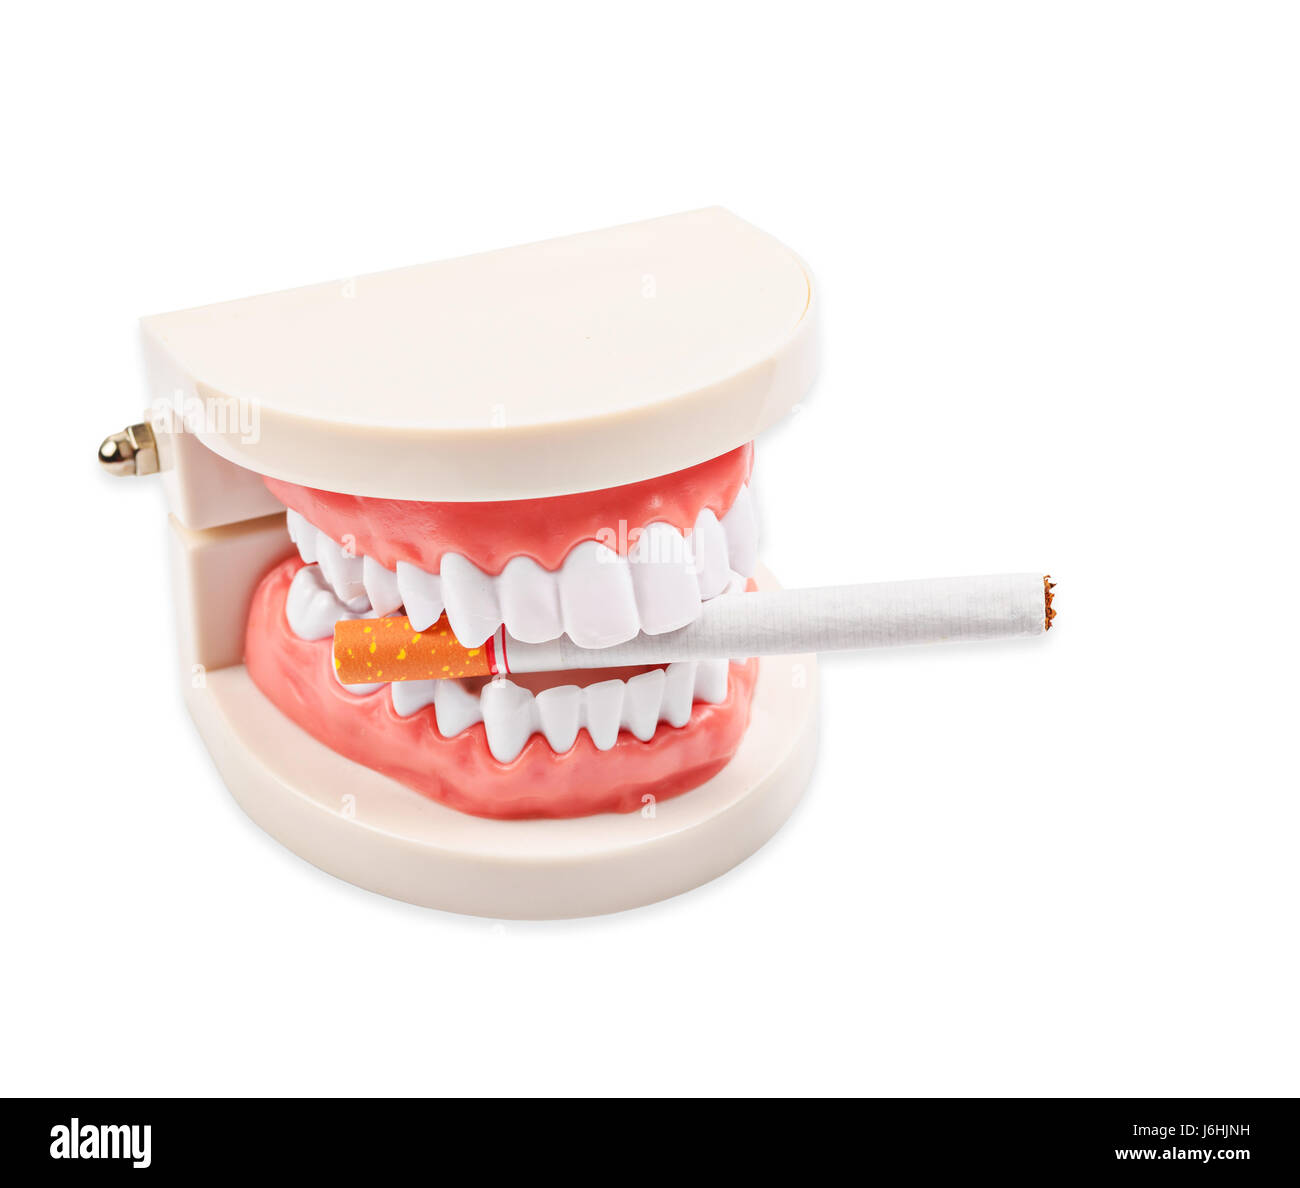 Tobacco in dentist demonstration teeth model. isolated on white background, Save clipping path. Stock Photo